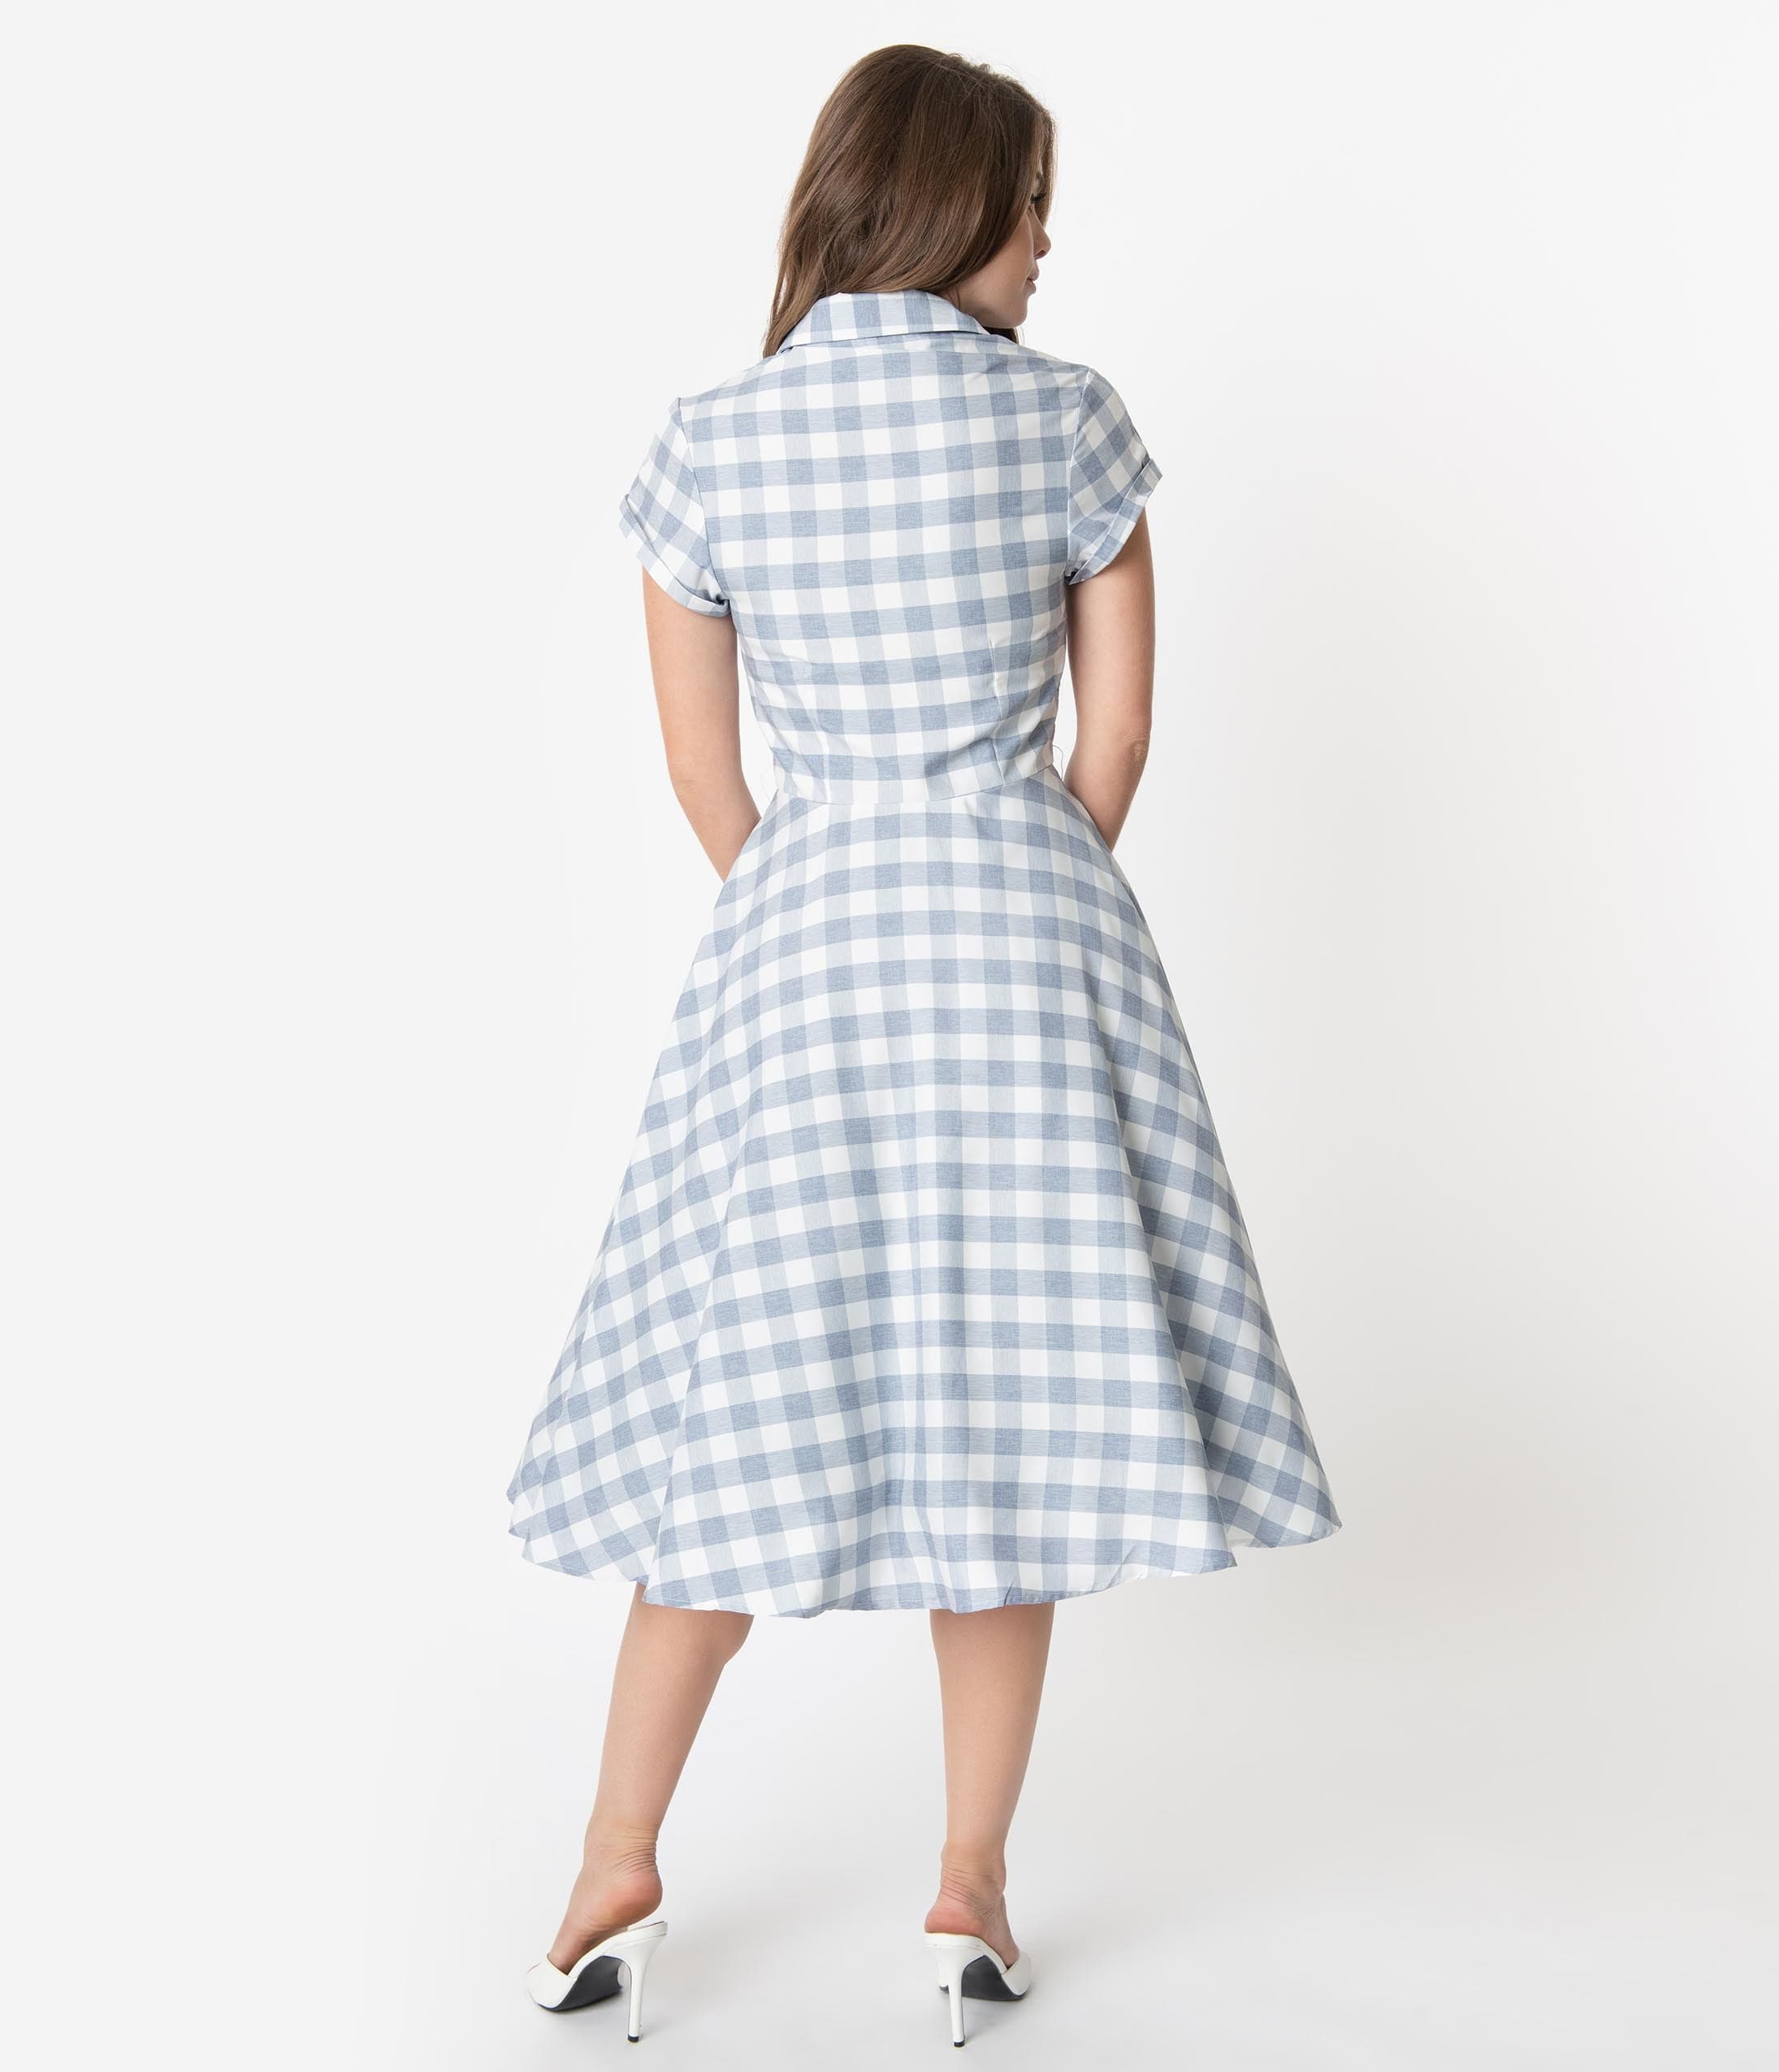 white and blue gingham dress